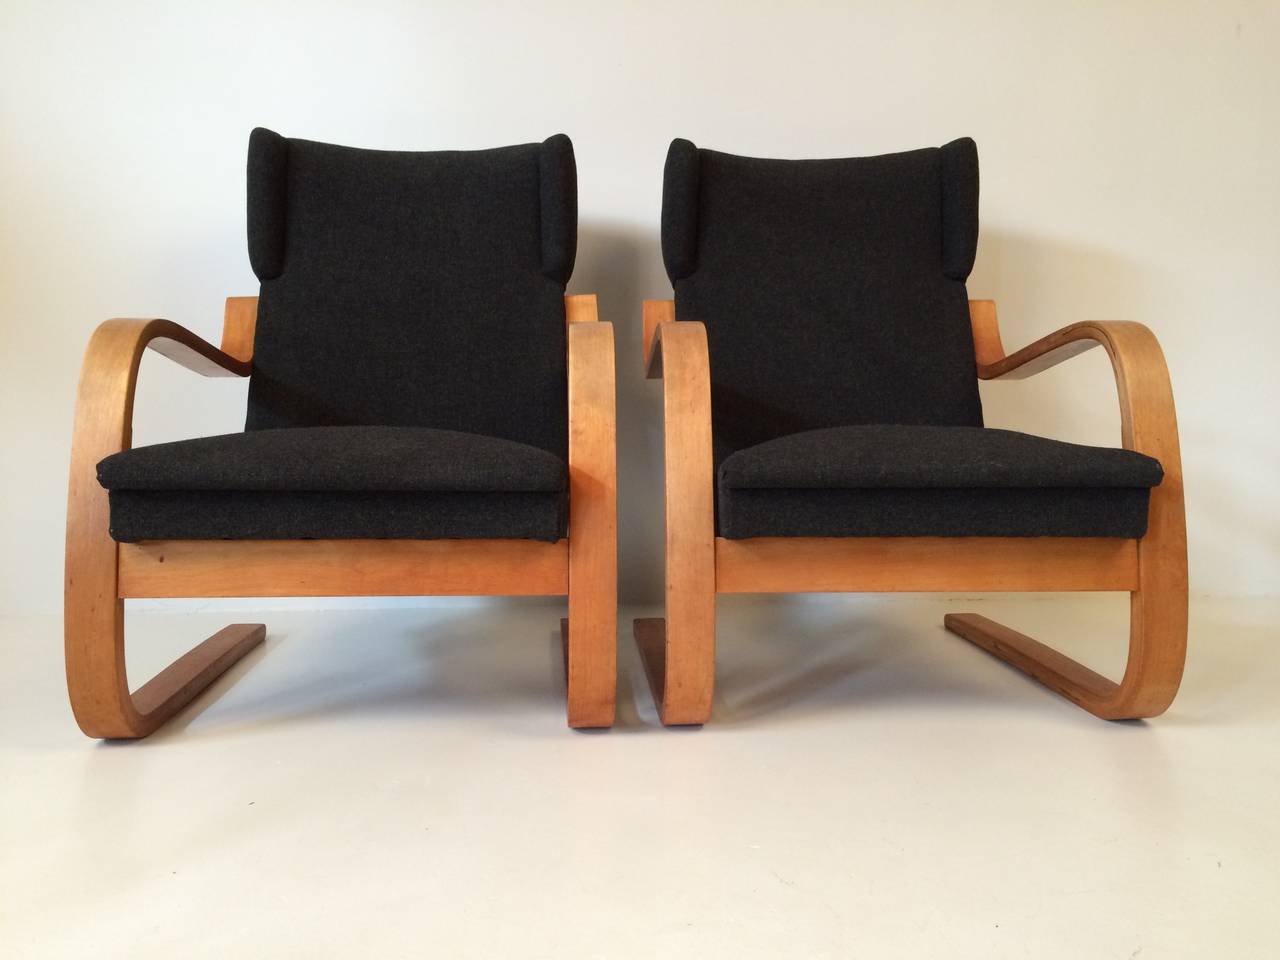 Rare pair of 34/402 high back cantilever wing chairs by Alvar Aalto.
Re-upholstered with Kvadrat fabric.
Marked with Aalto Design, made in Finland.